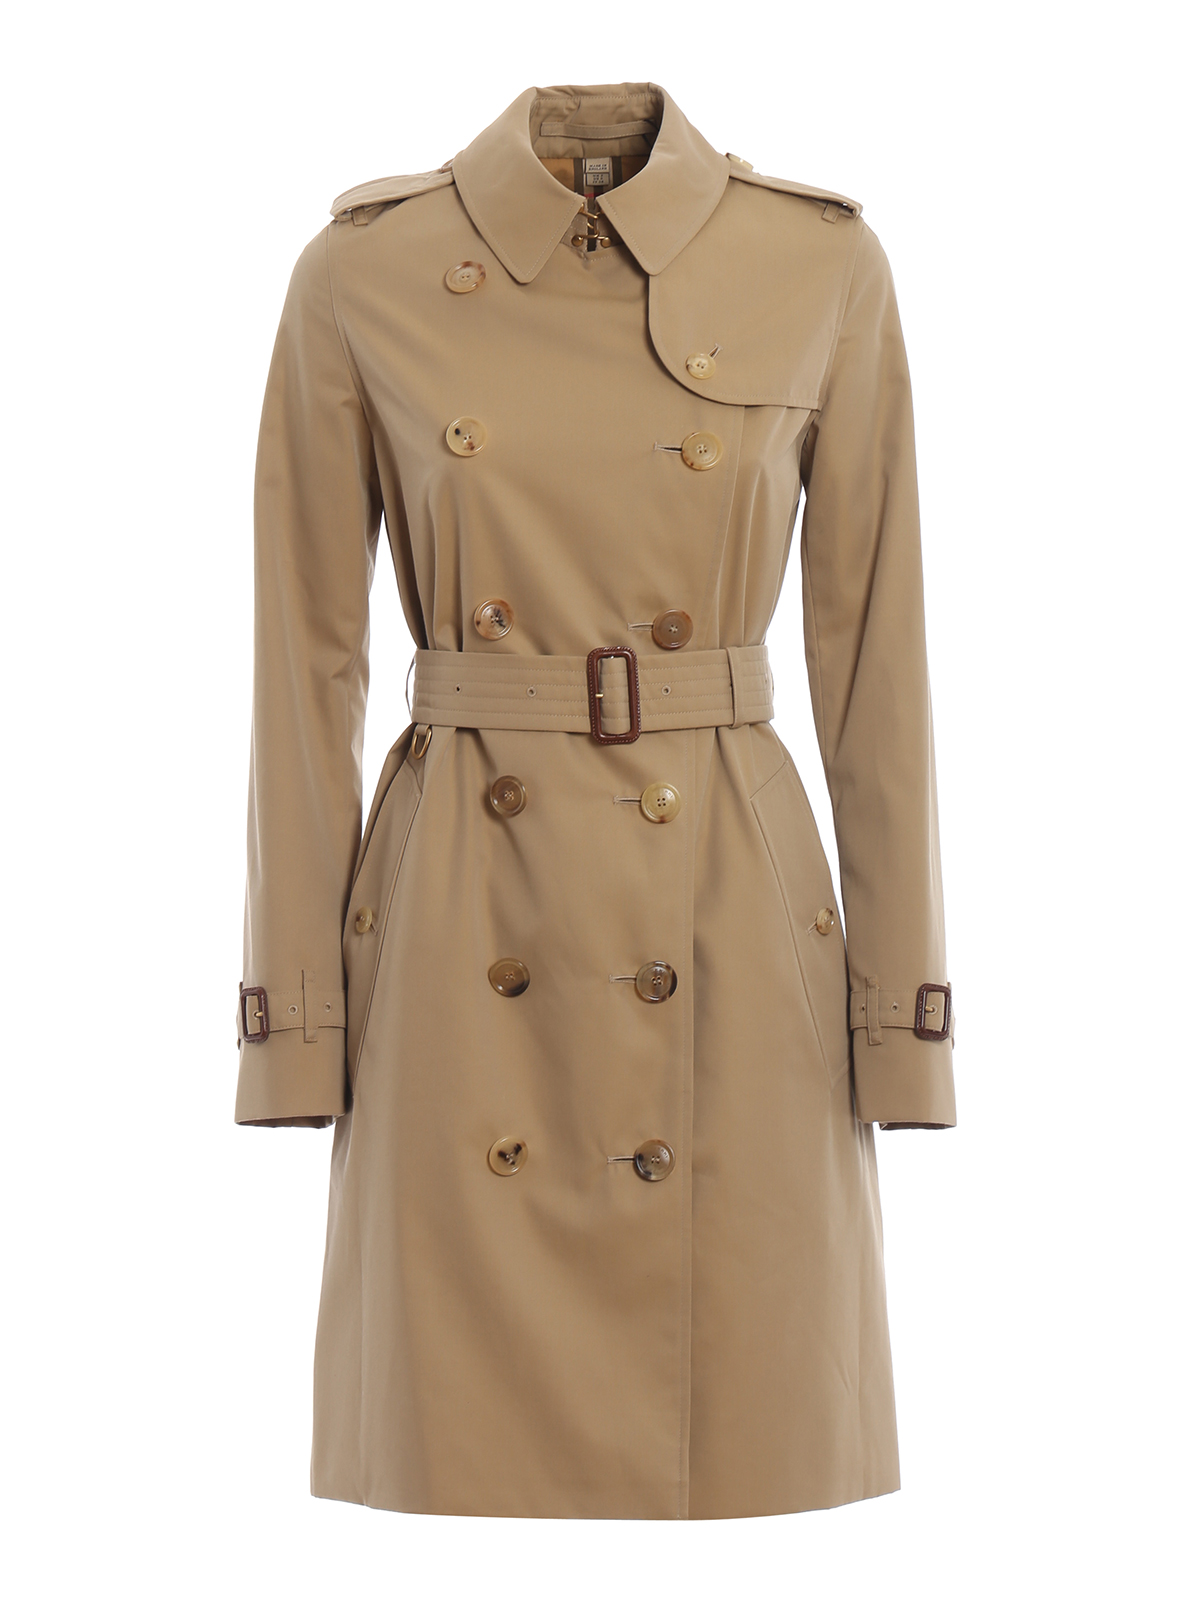 burberry trench coat kids gold